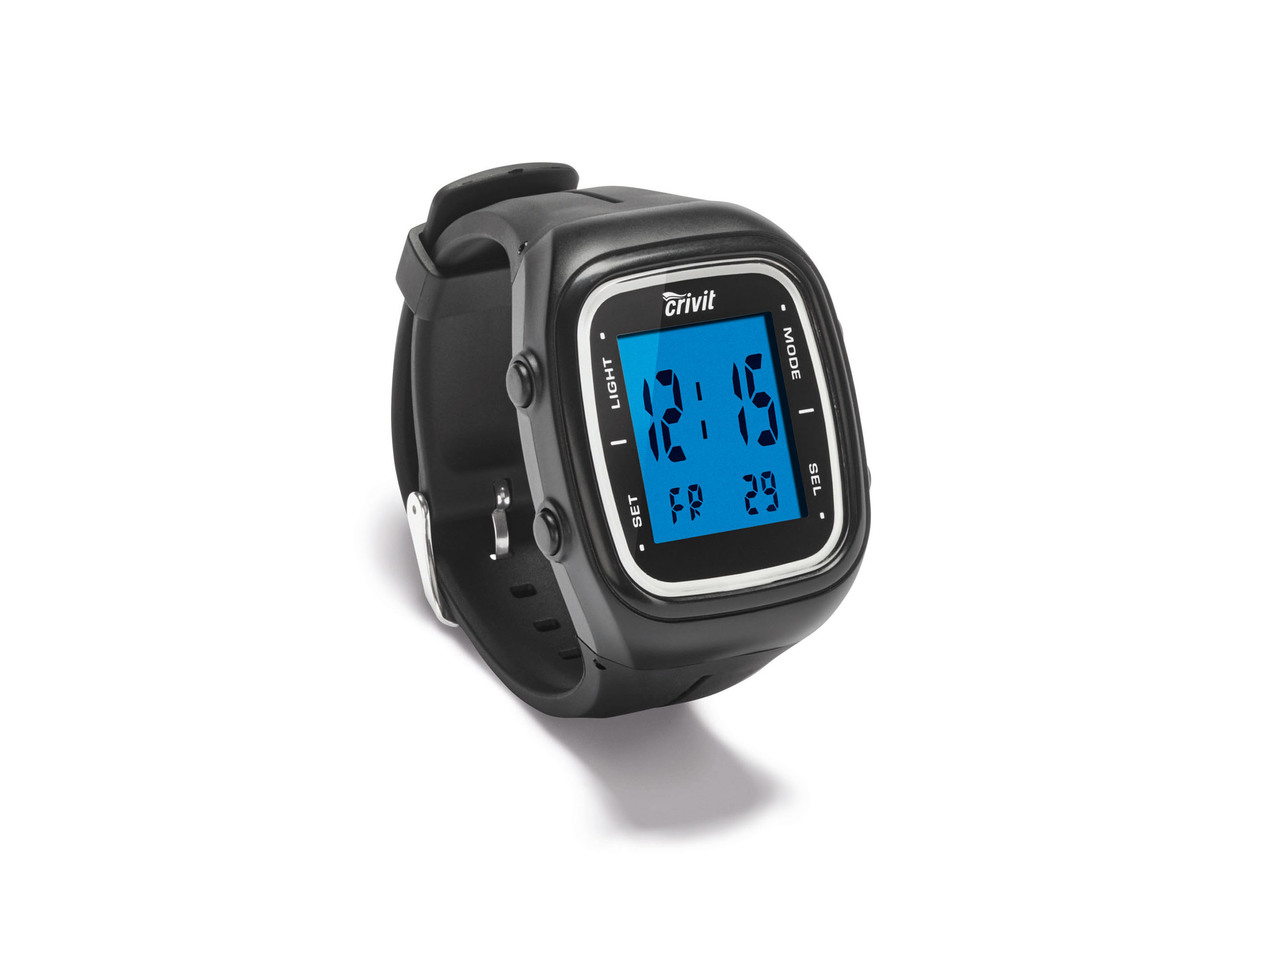 Wristwatch with Heartbeat Monitor and Step Counter